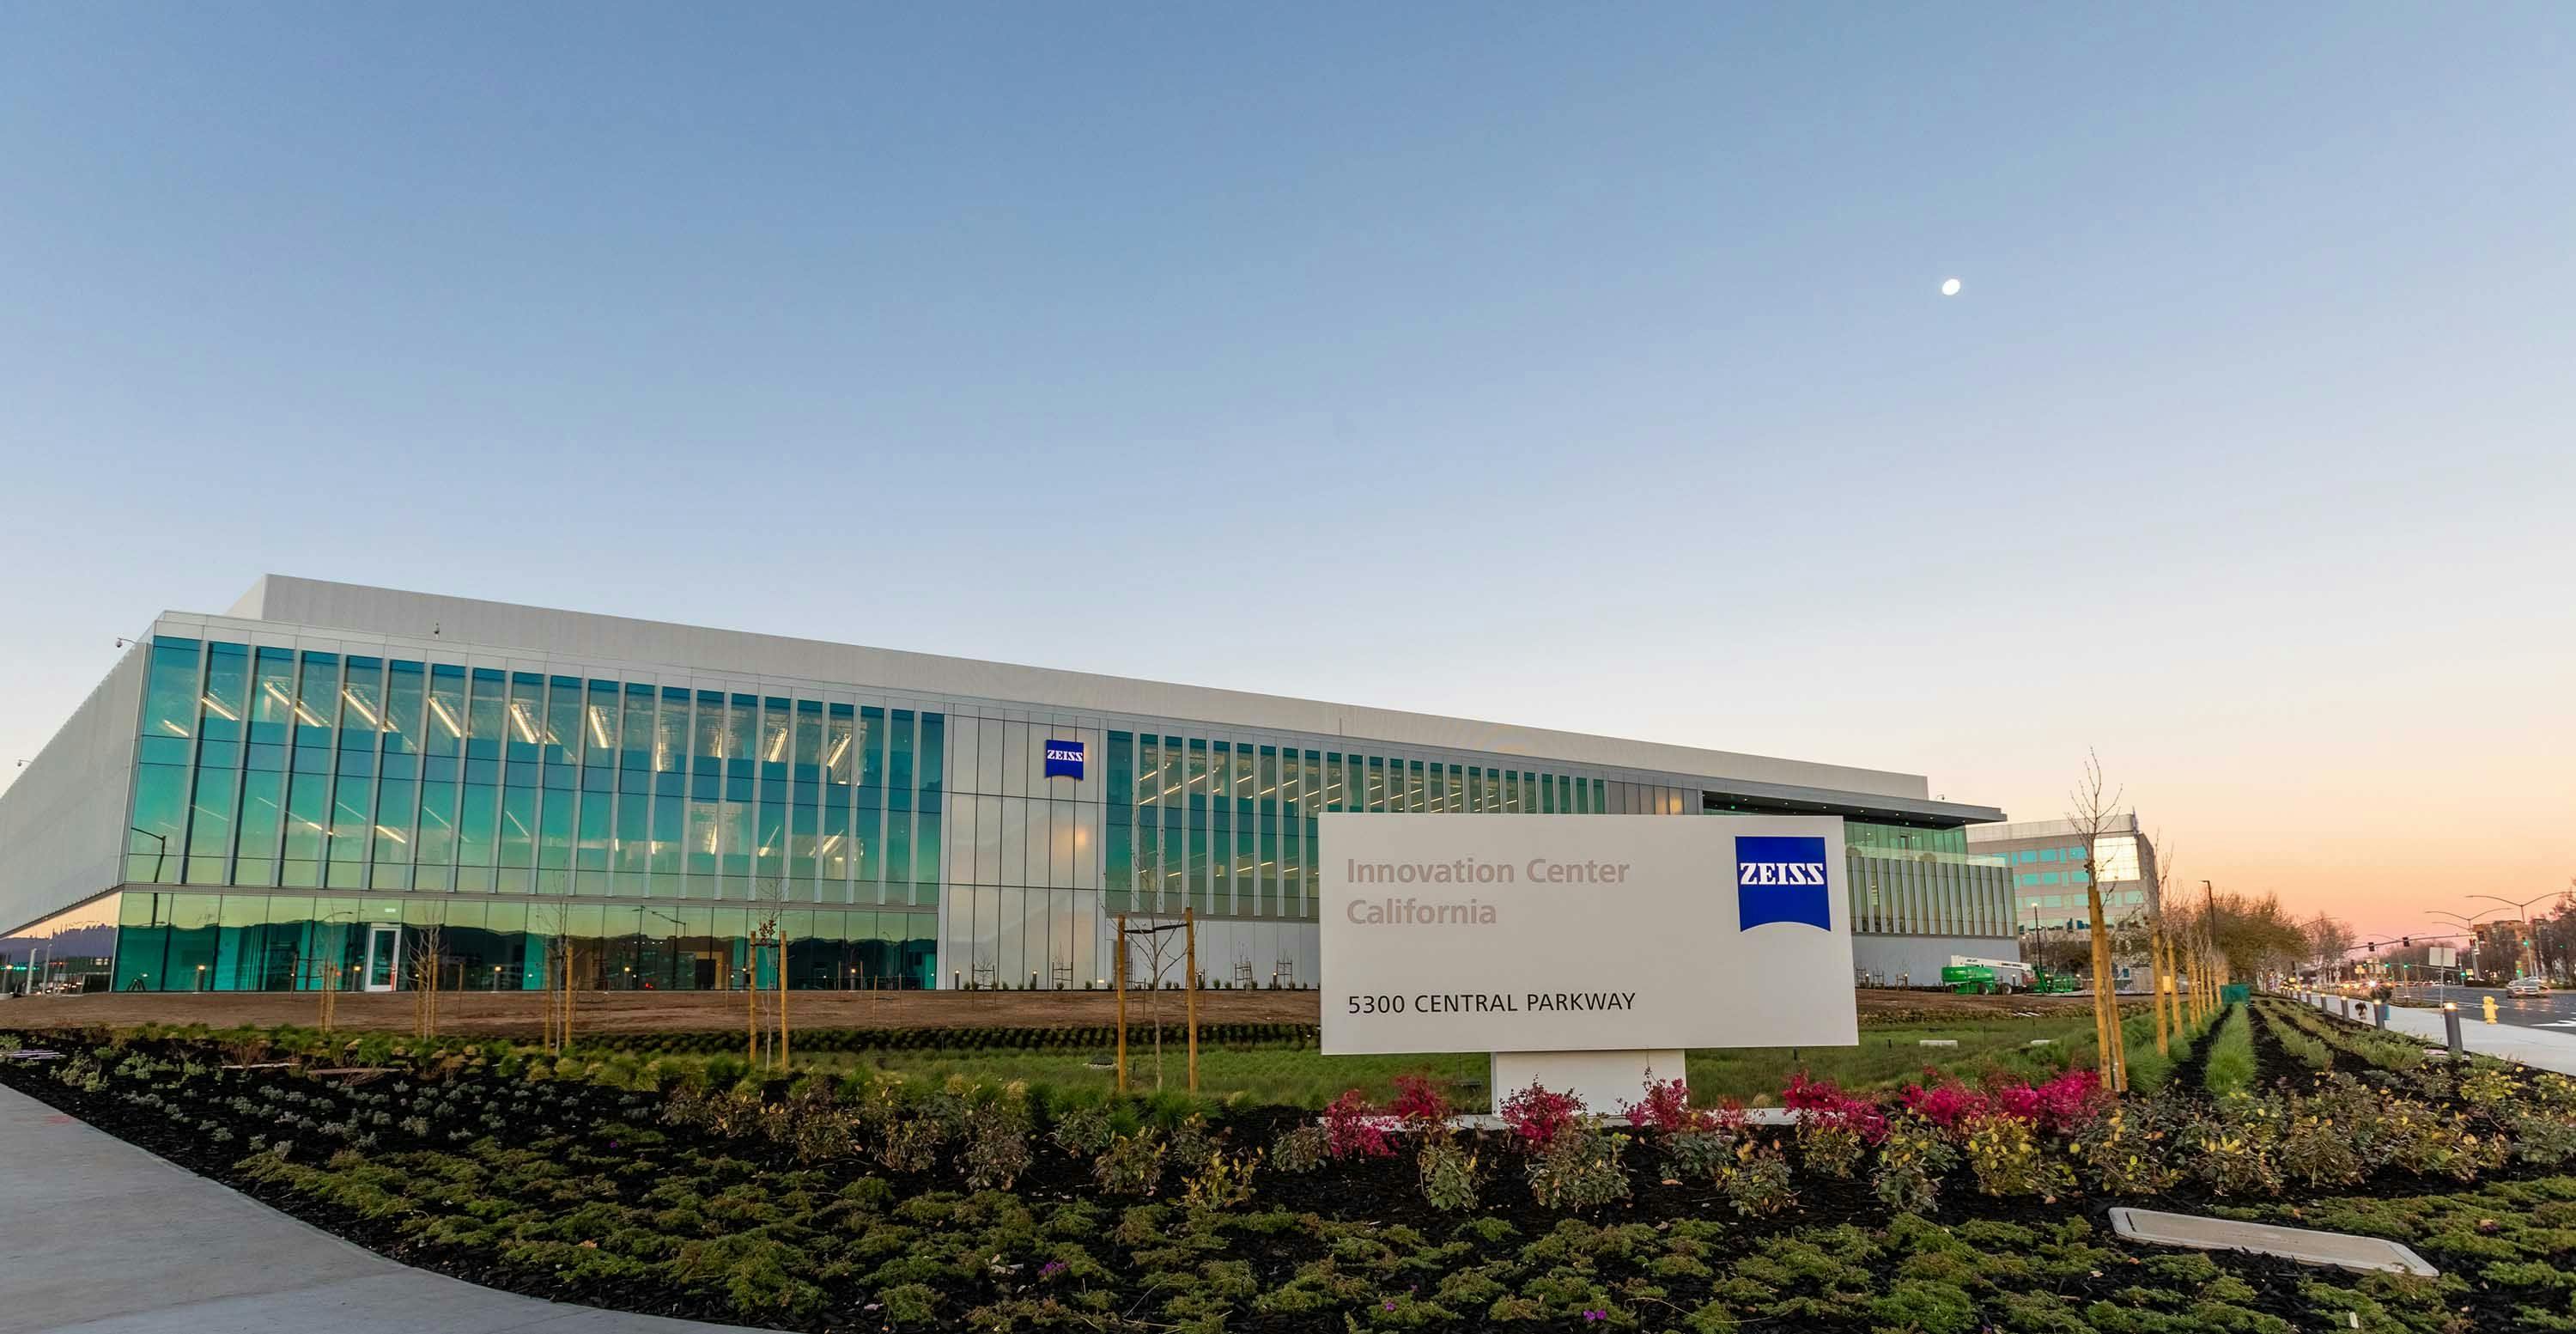 The Zeiss Innivation Ceter and company headquarters in Dublin, California. 